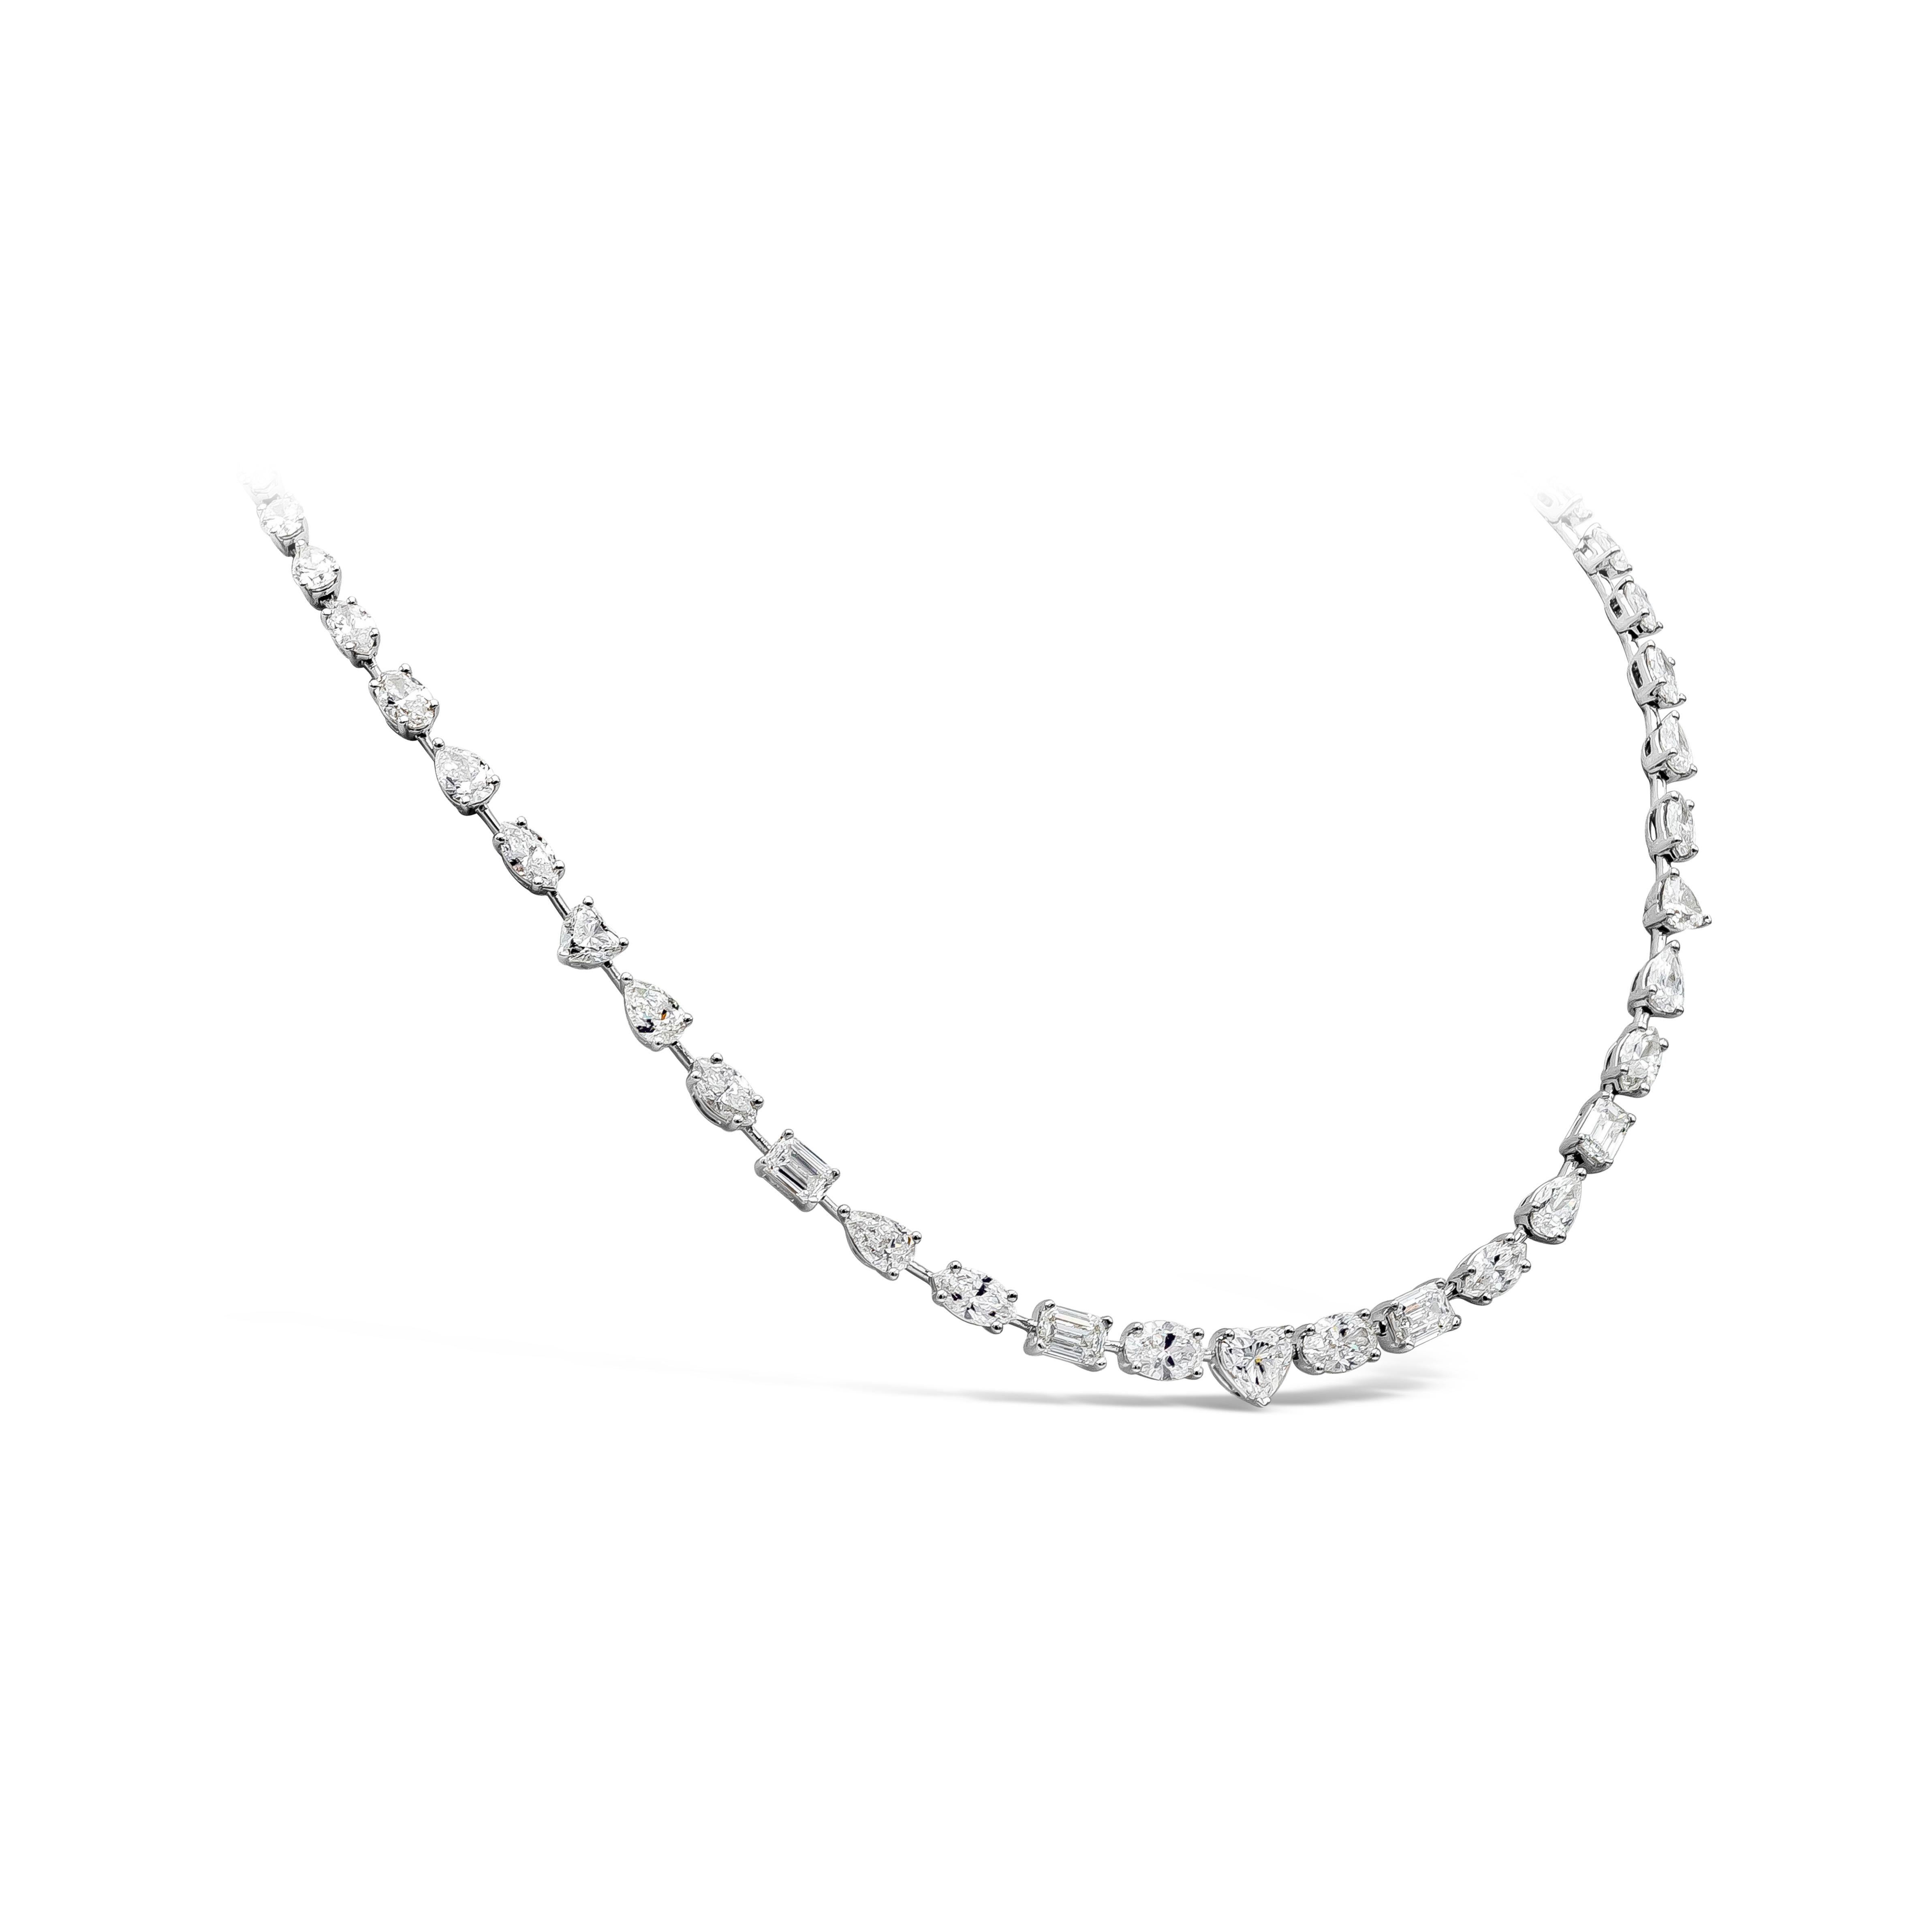 Elegantly made diamond tennis necklace showcasing a row of mixed cut pear, heart shape, oval, emerald cut diamonds that weighs 20.42 carats total, D-G color VS-SI in clarity. This sophisticated piece measure 193mm in length. The weight of this